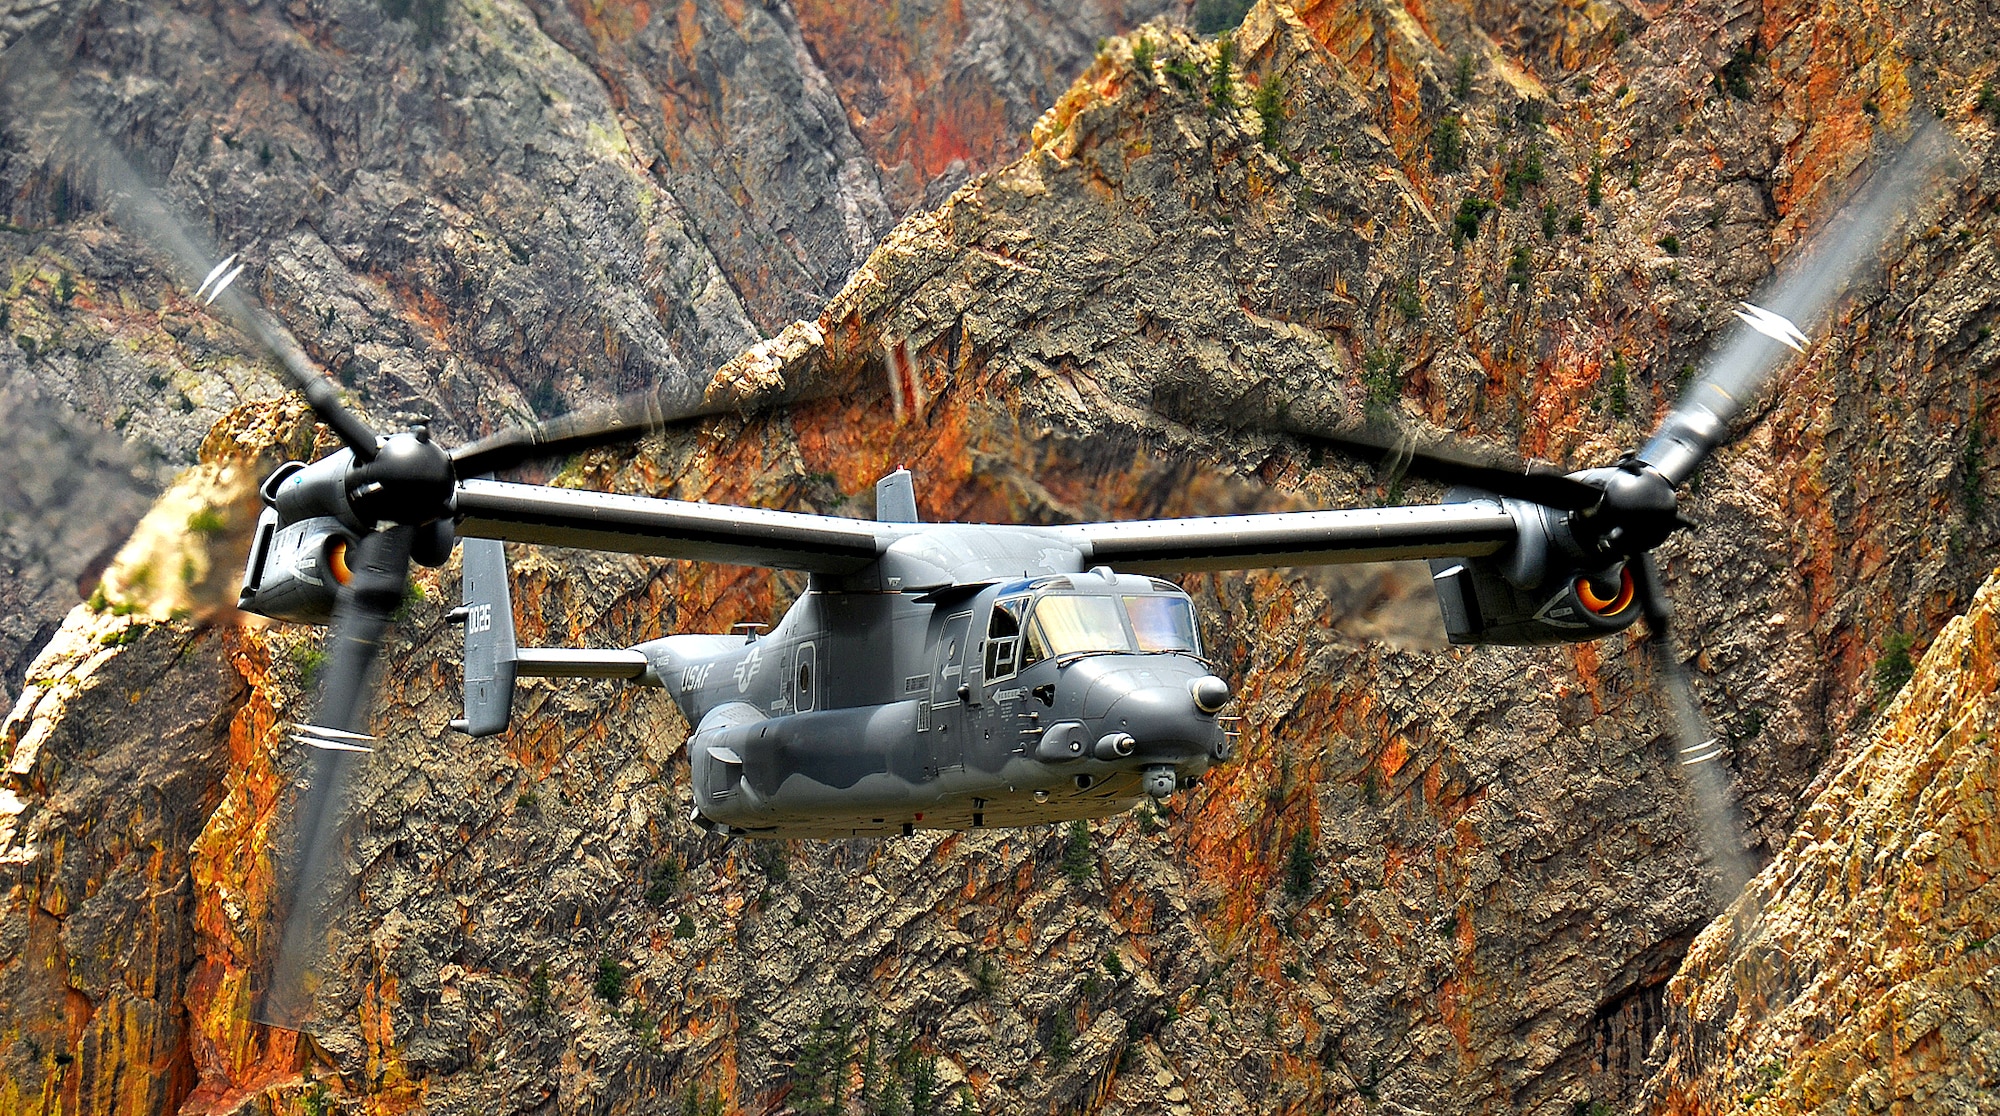 A CV-22 Osprey flies over the New Mexico and Colorado wilderness in August. The CV-22 participated in its first search and rescue mission Oct. 5 when a small civilian aircraft crashed. (U.S. Air Force photo/Staff Sgt. Markus Maier)
